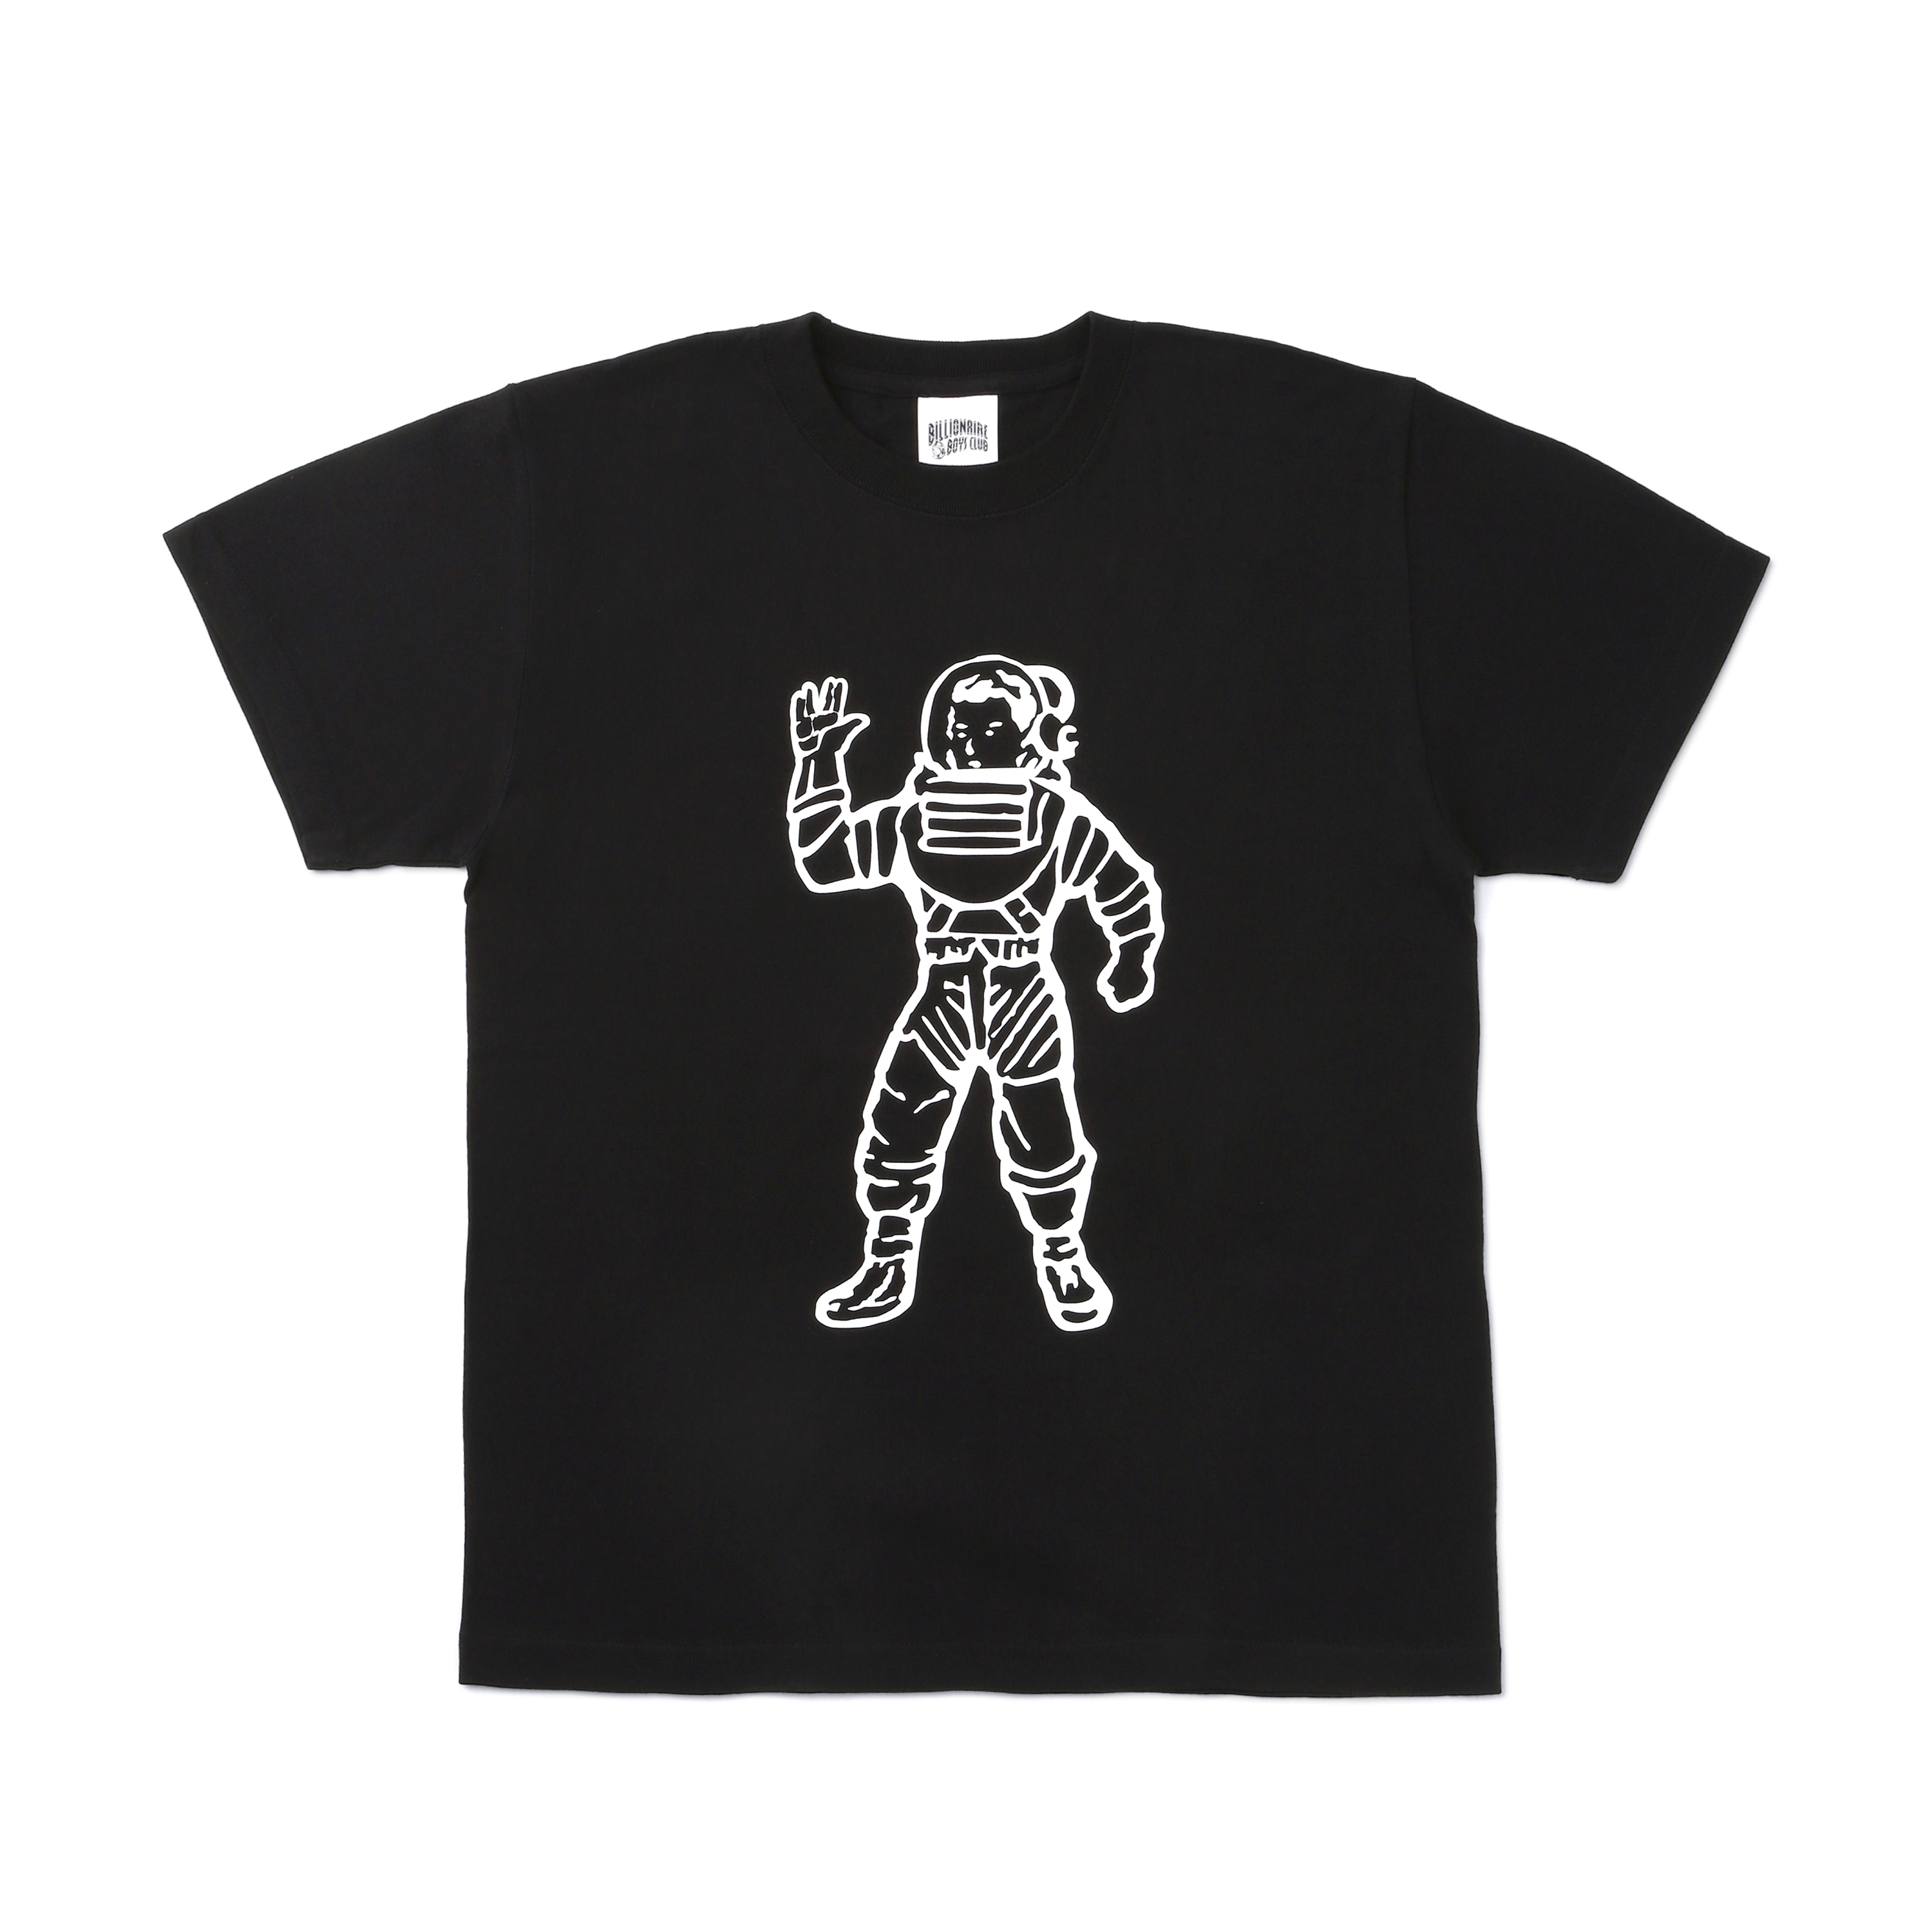 Billionaire Boys Club Is Re-Releasing Japan-Exclusive Items From 2010 ...